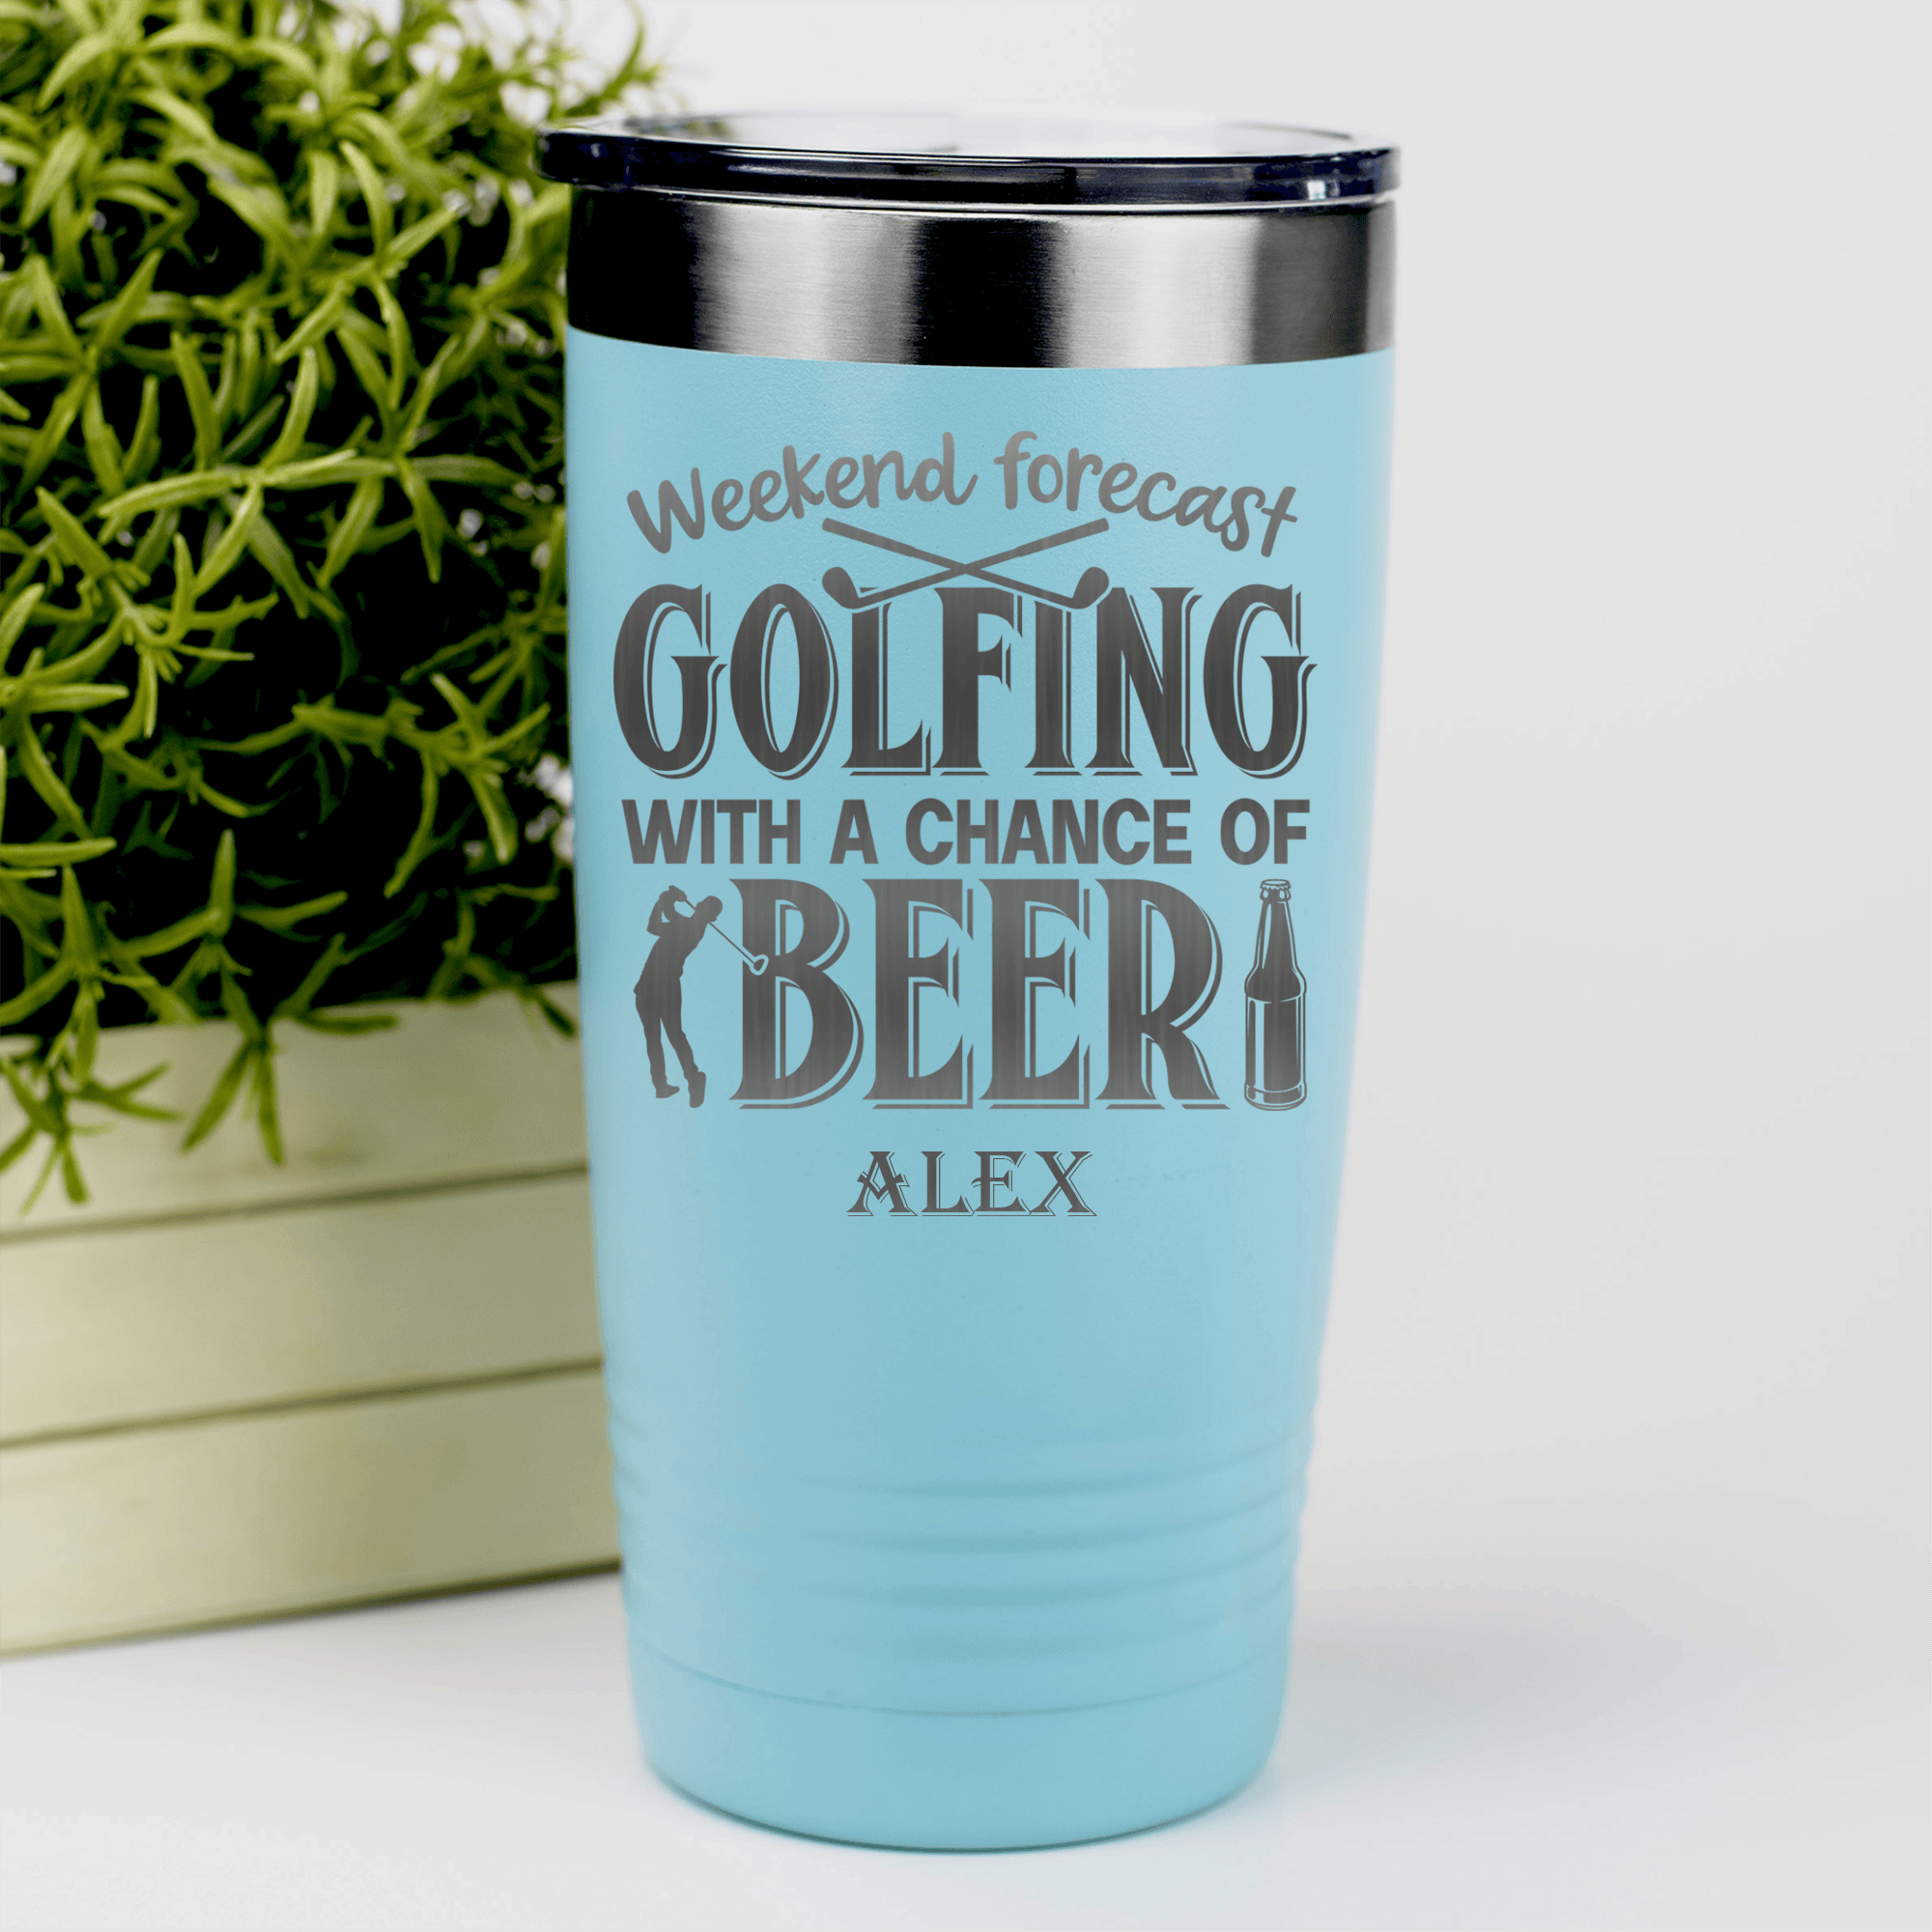 Teal Golf Tumbler With Weekend Forecast Golfing Design